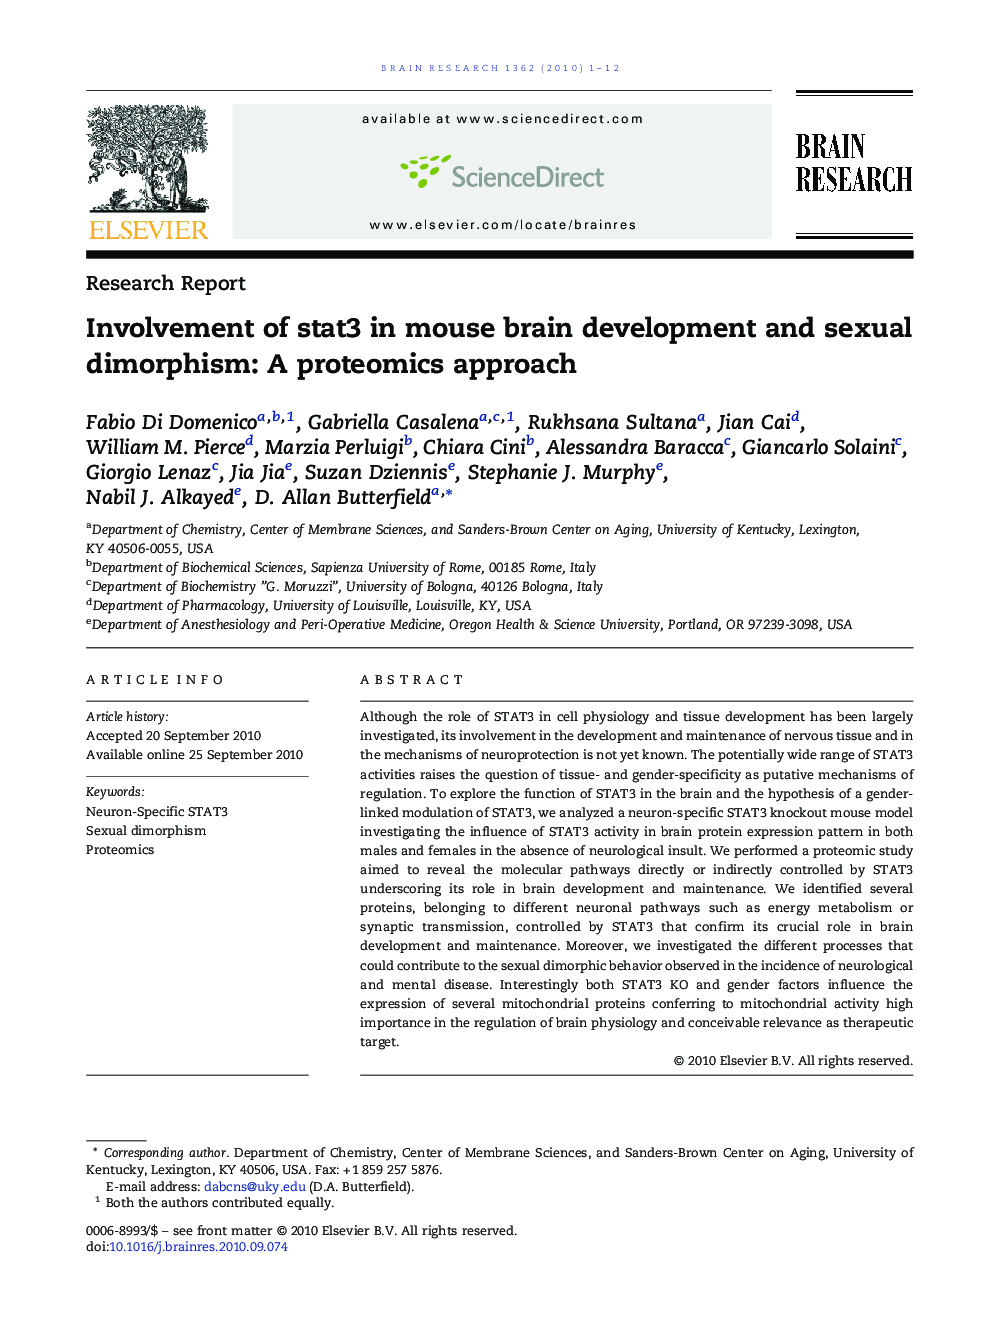 Involvement of stat3 in mouse brain development and sexual dimorphism: A proteomics approach